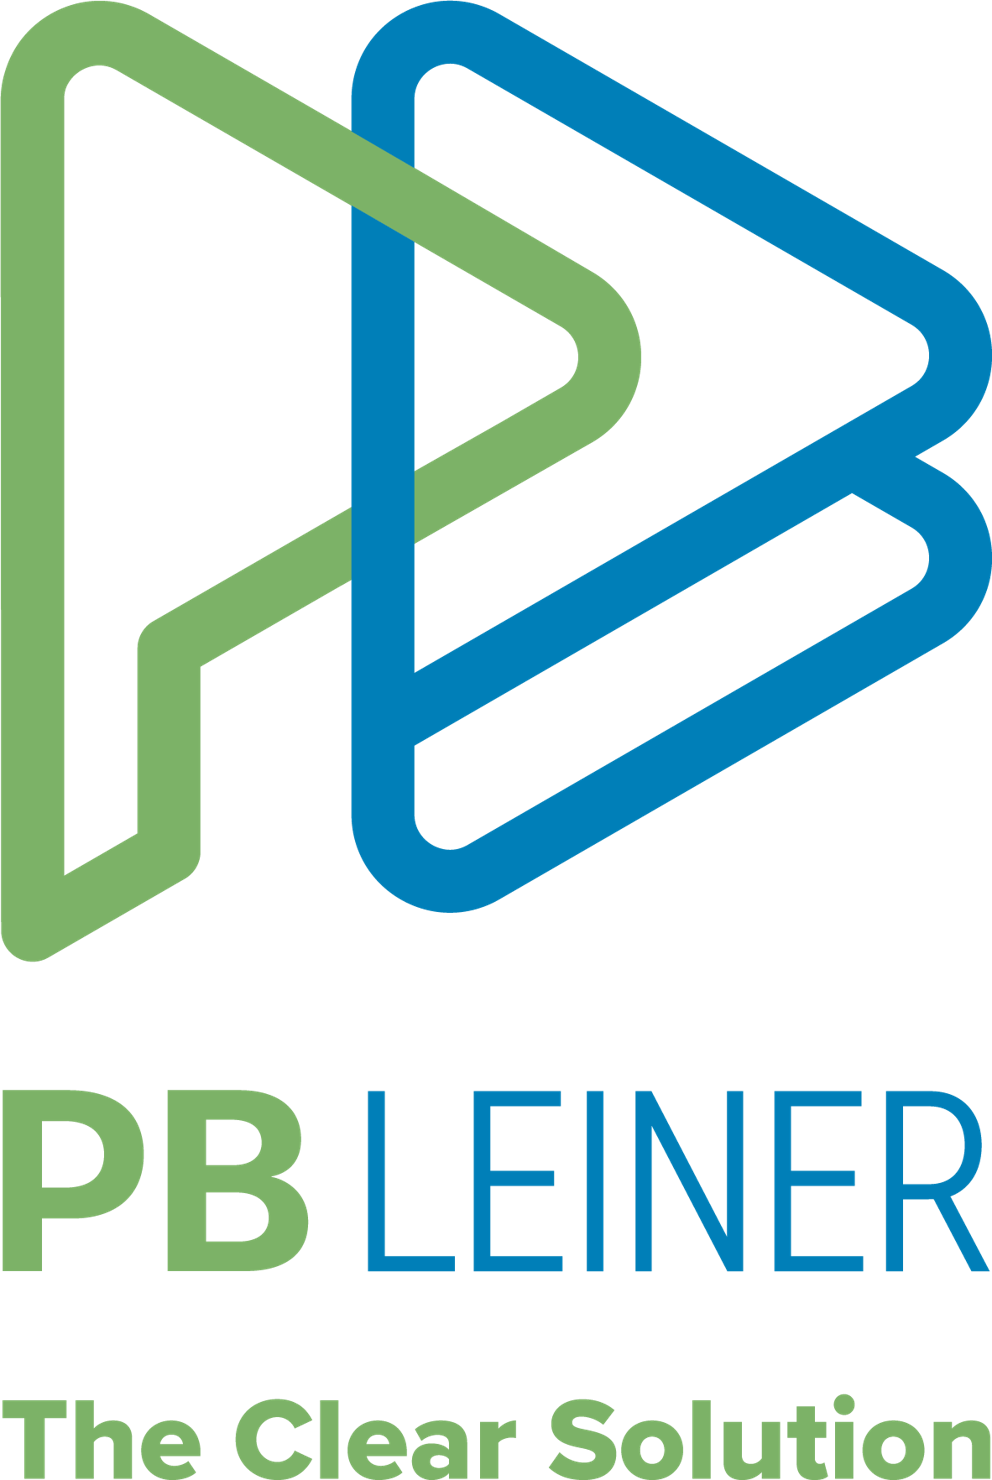 PB Leiner PNG logo with baseline.png